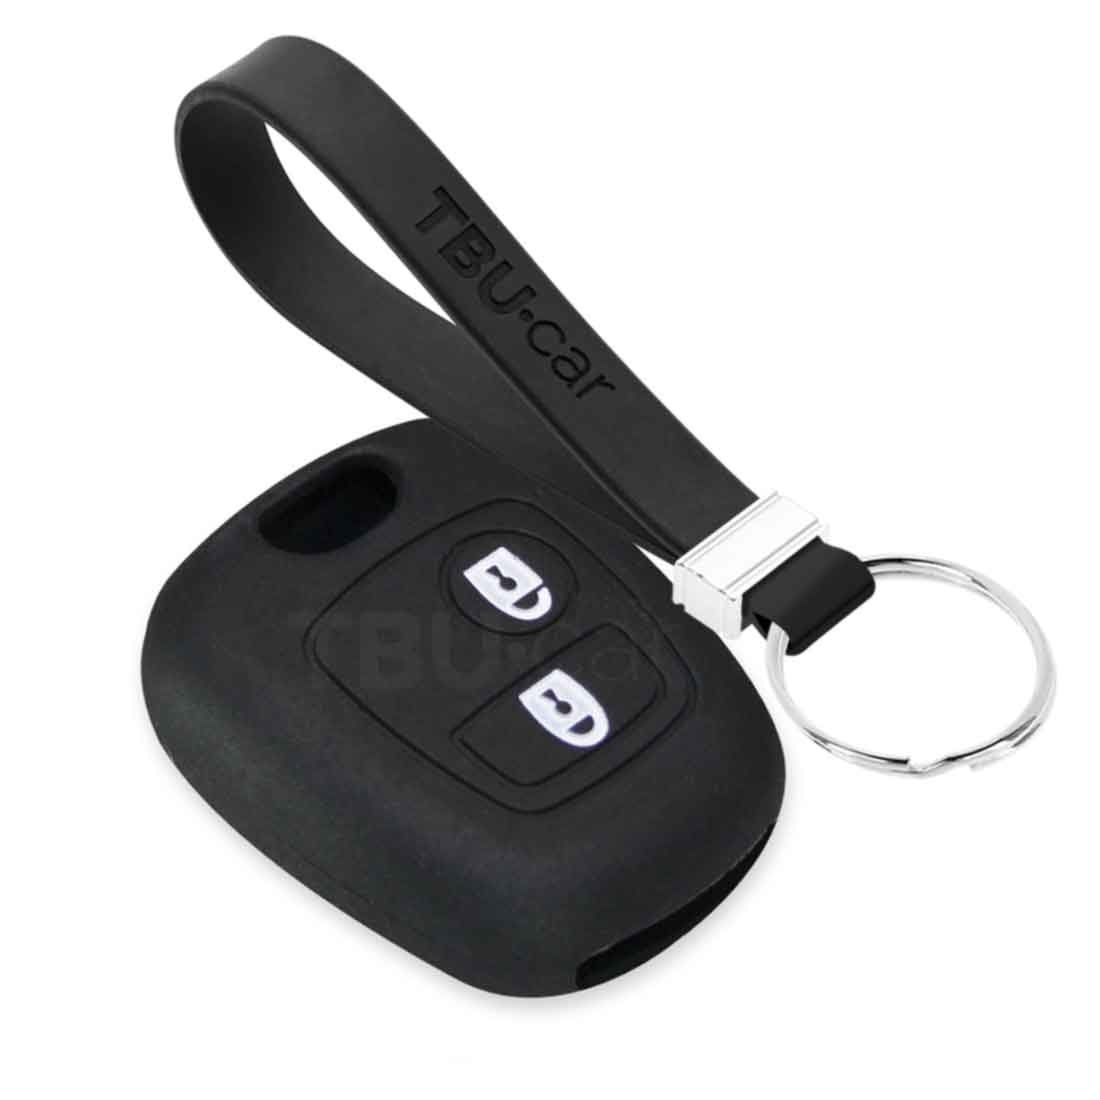 TBU car TBU car Car key cover compatible with Toyota - Silicone Protective Remote Key Shell - FOB Case Cover - Black